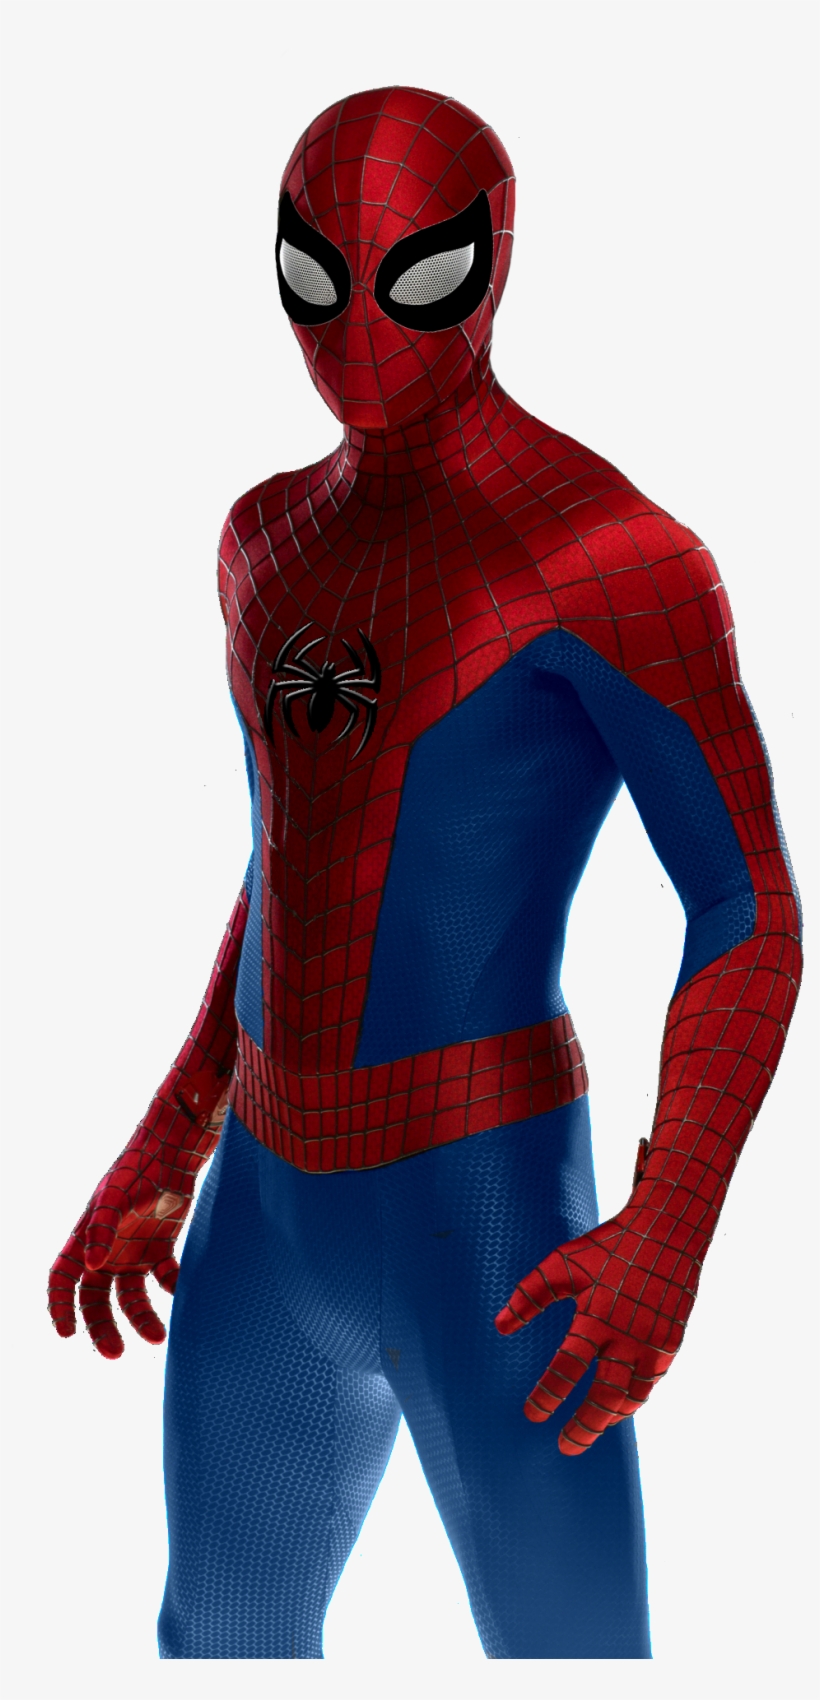 Png Download Amazing Spiderman Png Image - Amazing Spider Man Transparent, transparent png #465900